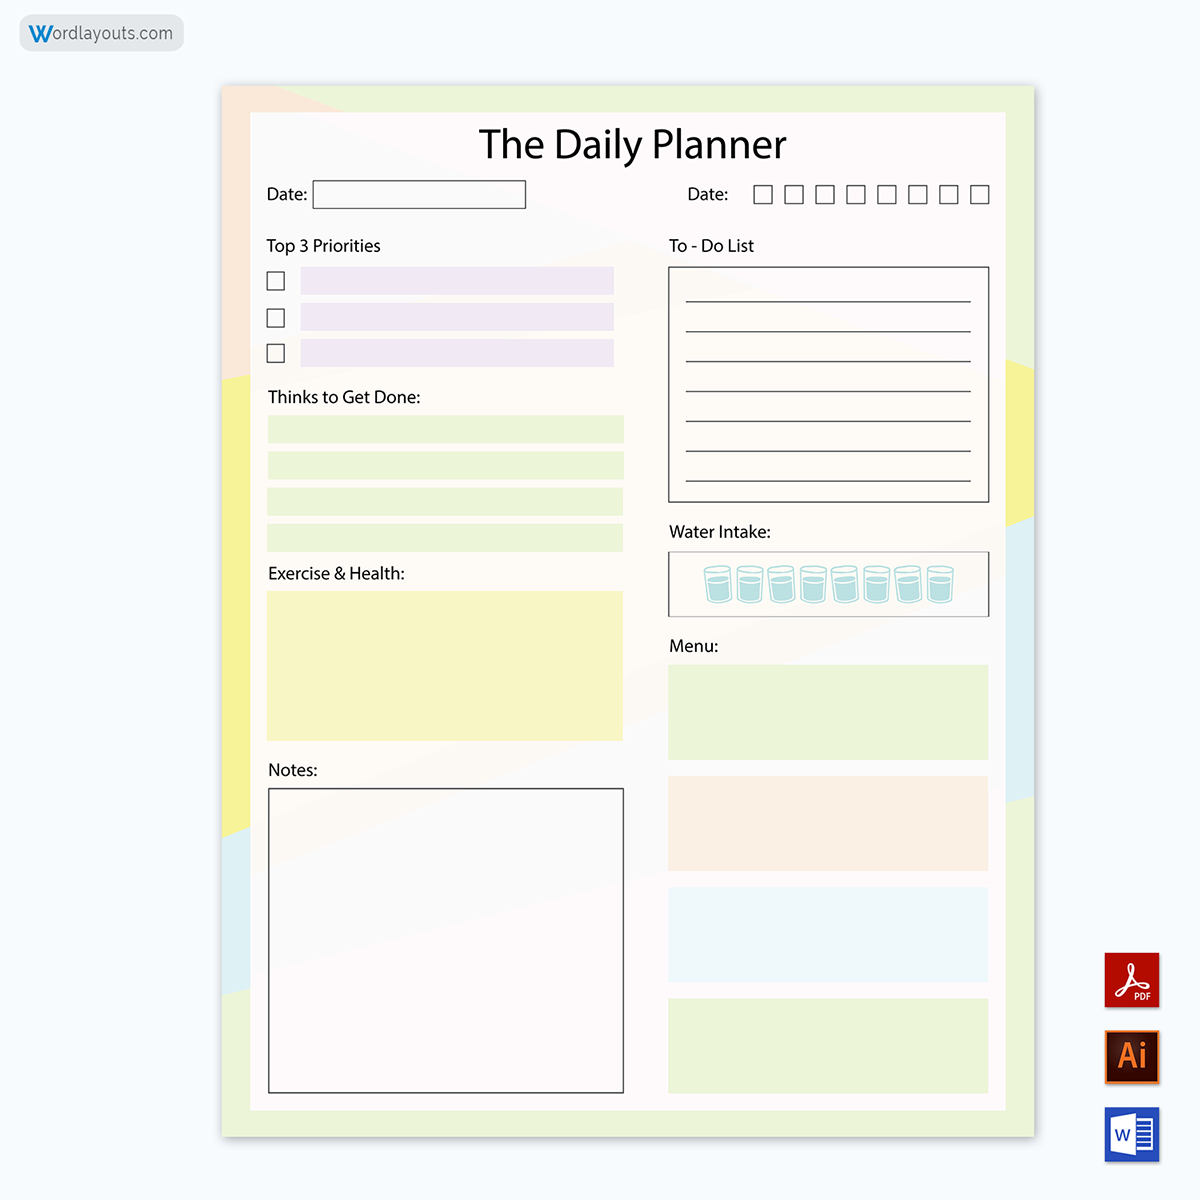 Daily-Planner-Template-8669ndnjp-06-23-p10